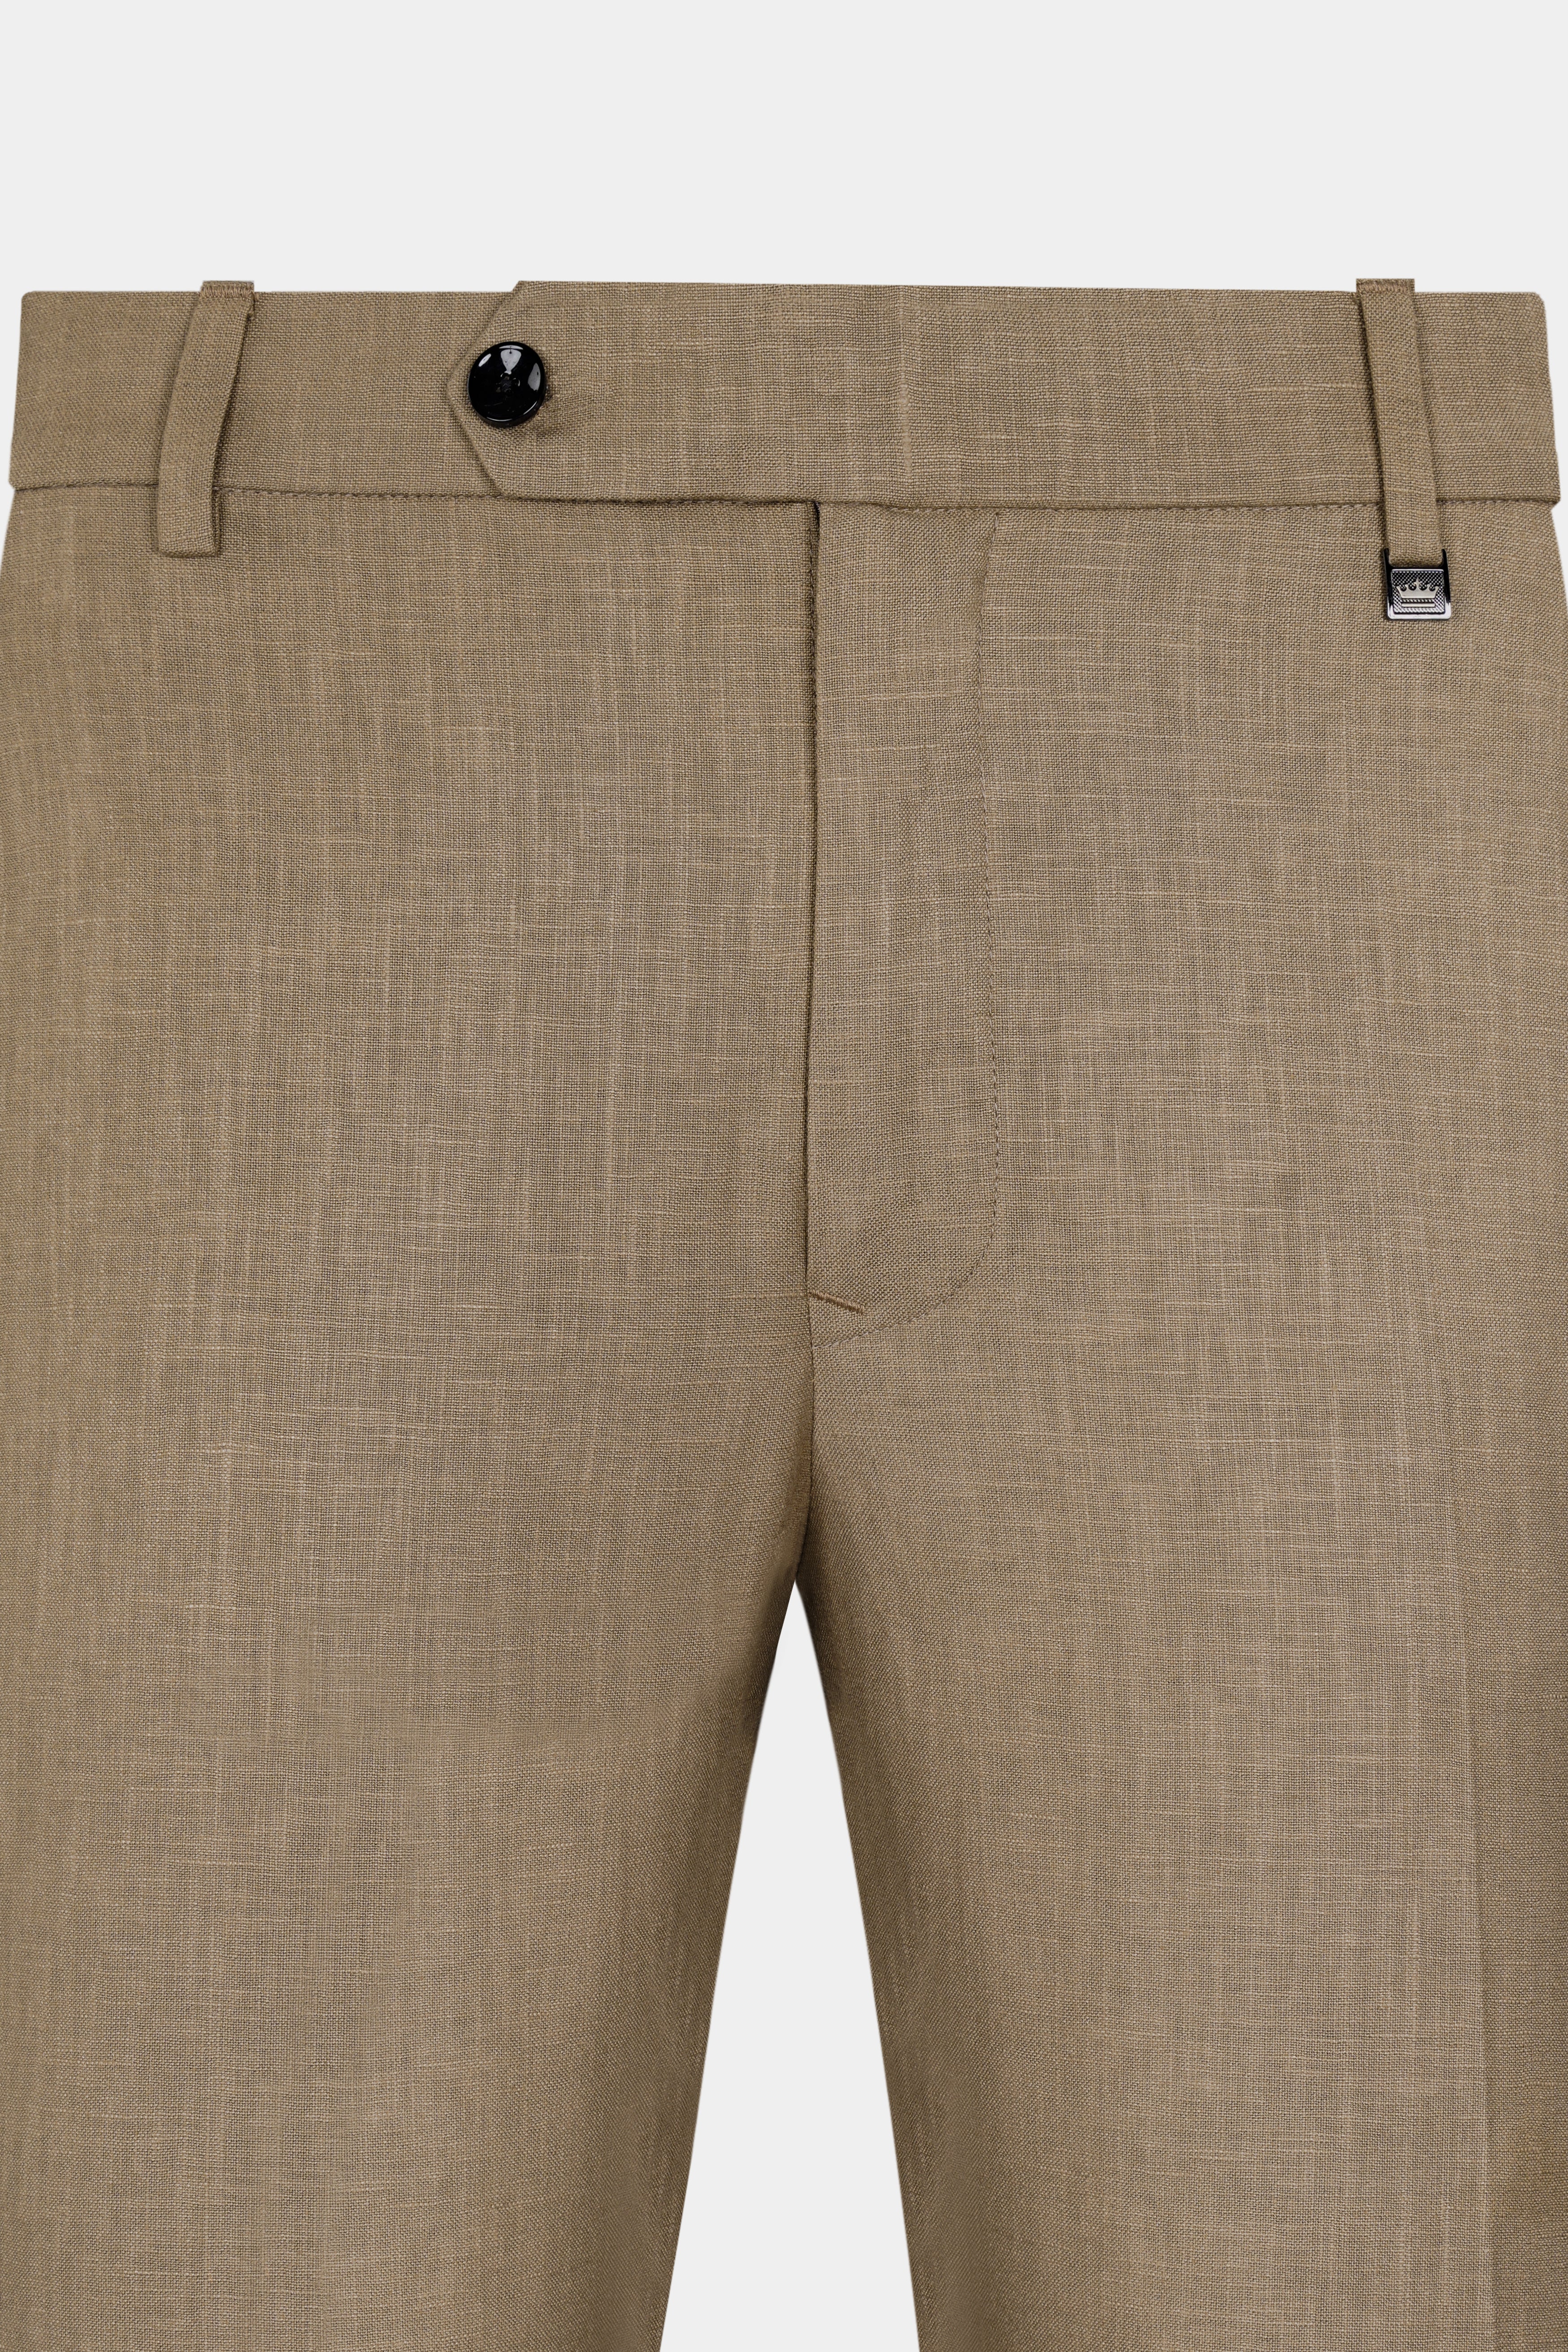 ID0622 Original Ethnic Indian Cotton Trousers, Casual Pants, Indian Trousers,  - Etsy